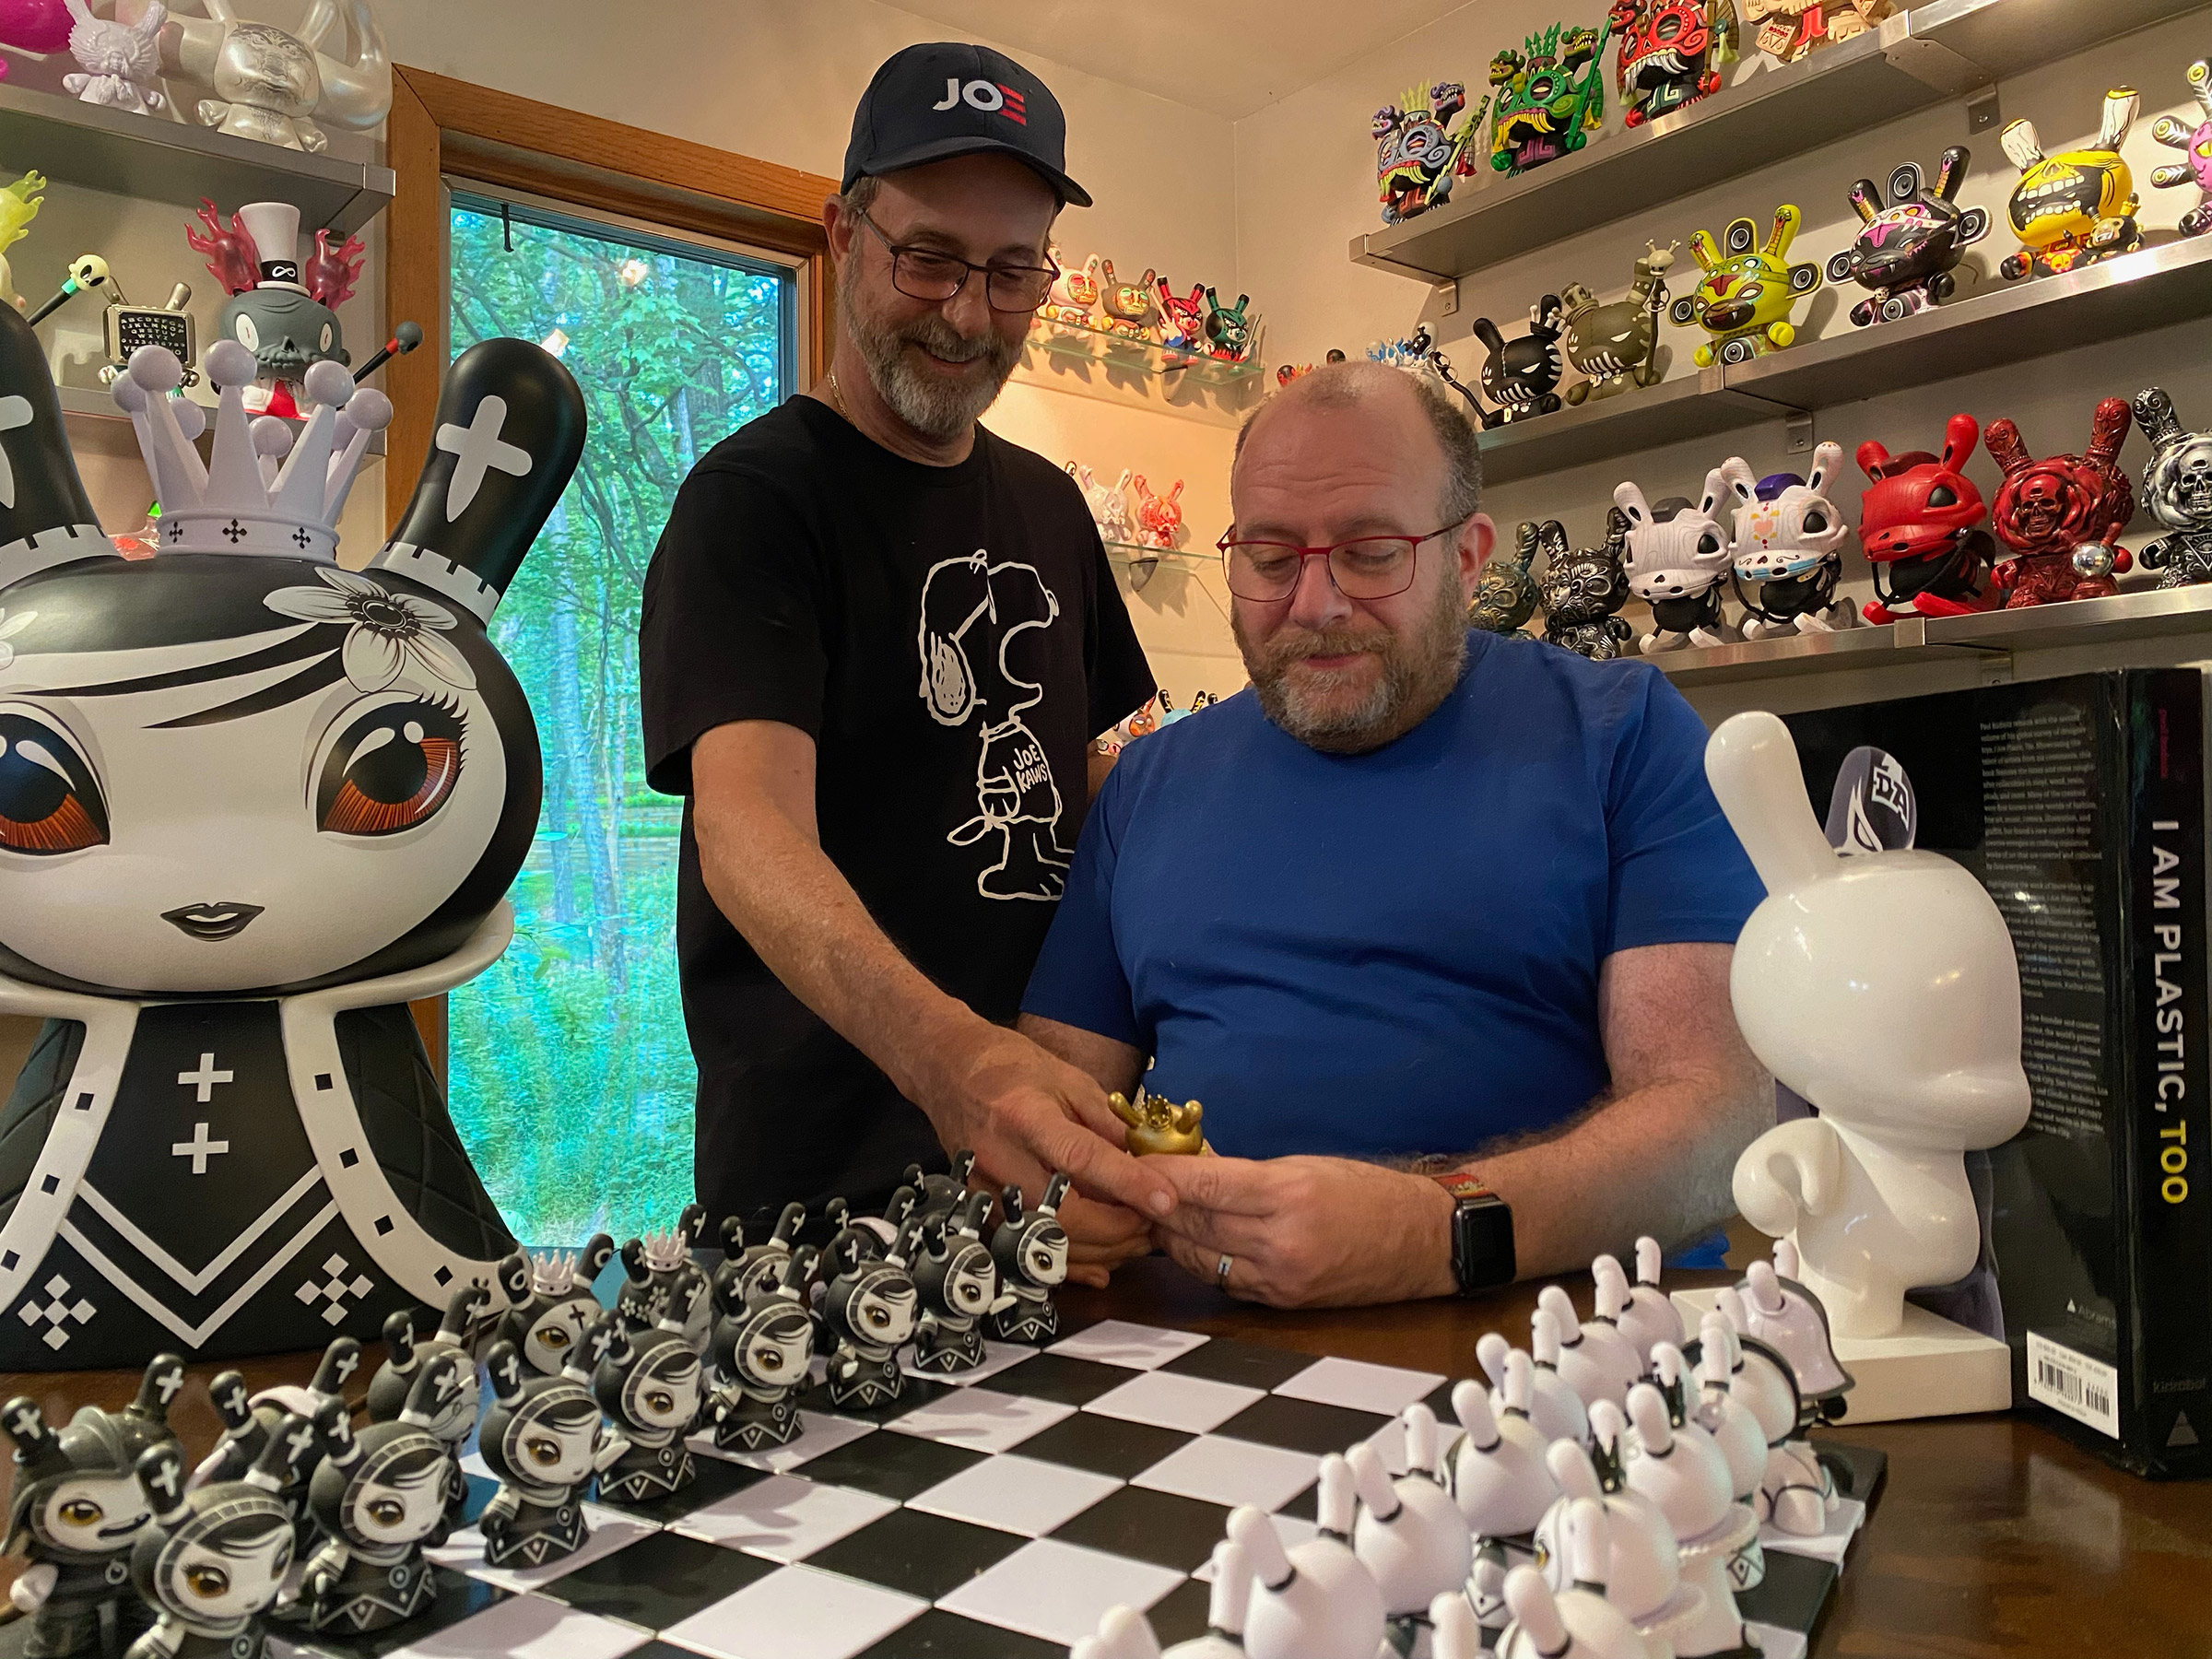 Phil Gutis, right, with his husband Tim Weaver at their home in Solebury, Pa., July 2020. “If you present a drug to me that might help to slow the deterioration, hell yes, yeah make it available,” says Gutis. “That’s the voice I feel is completely lost in all this.” (Courtesy Tim Weaver)